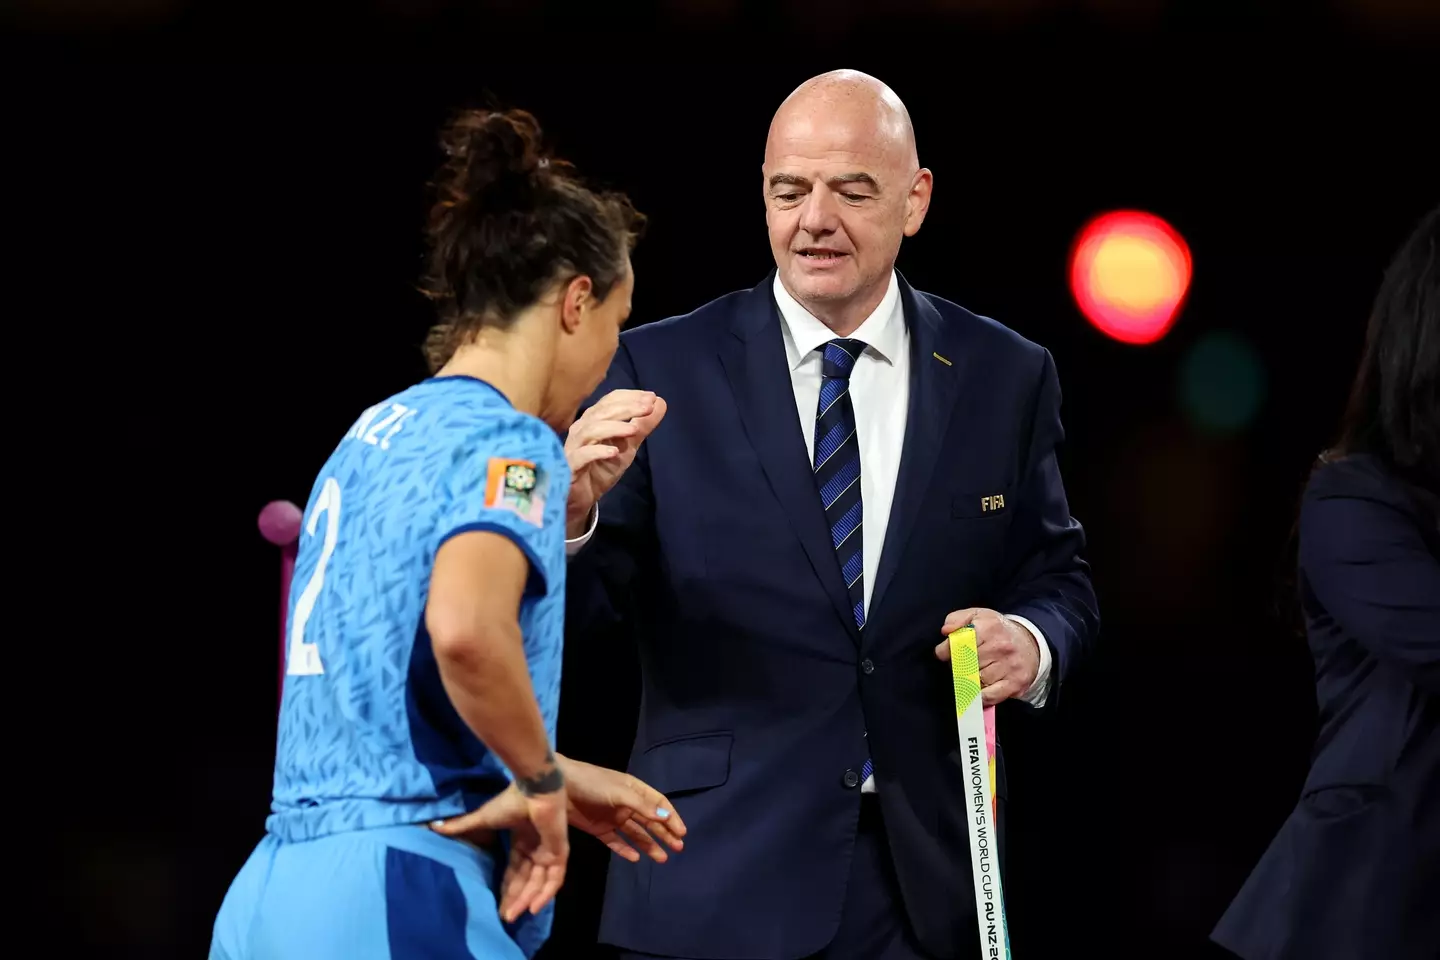 Fans spotted an awkward moment between Lucy Bronze and Gianni Infantino.